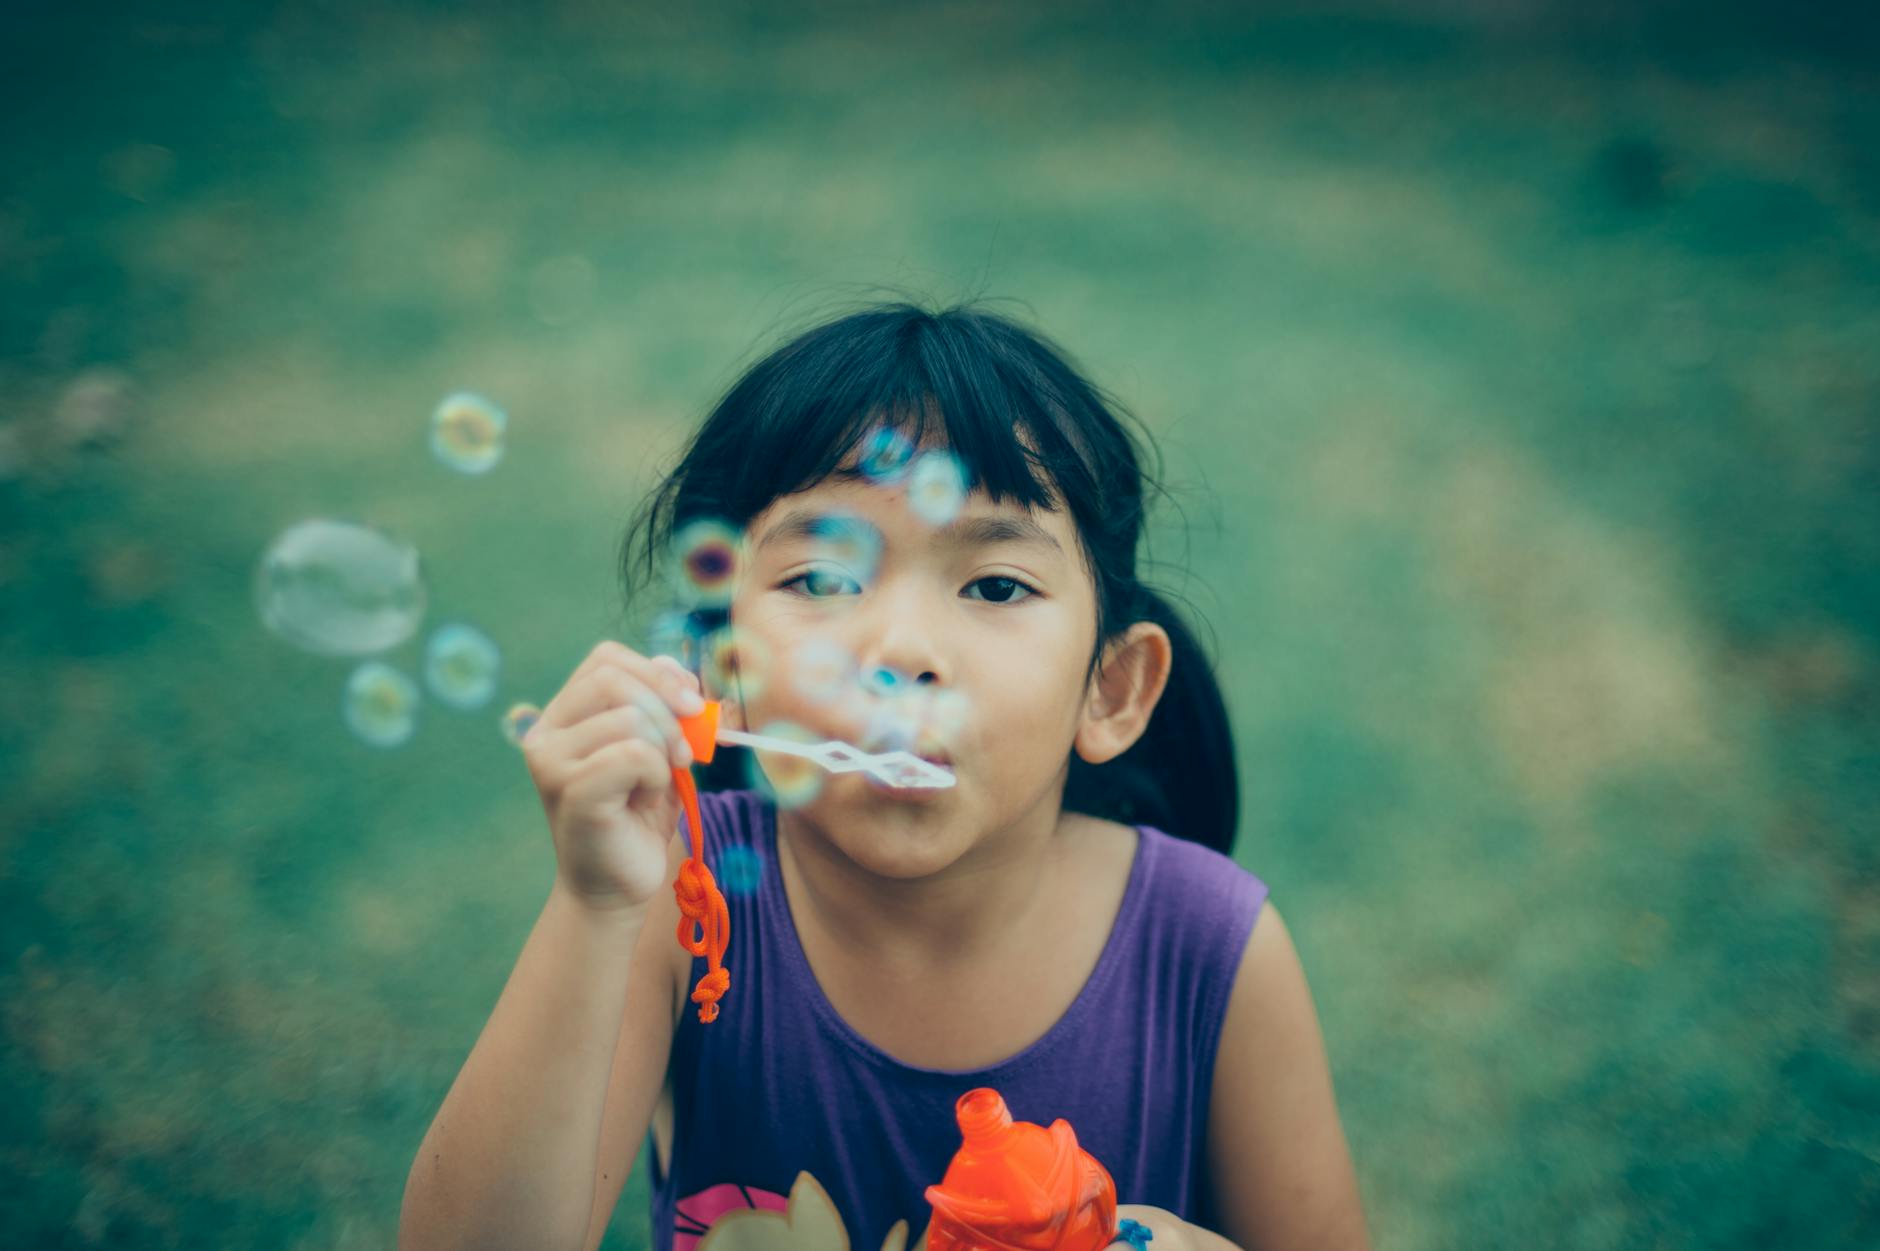 Summer Reading: Outdoor Fun with Bubbles (O'Neill)